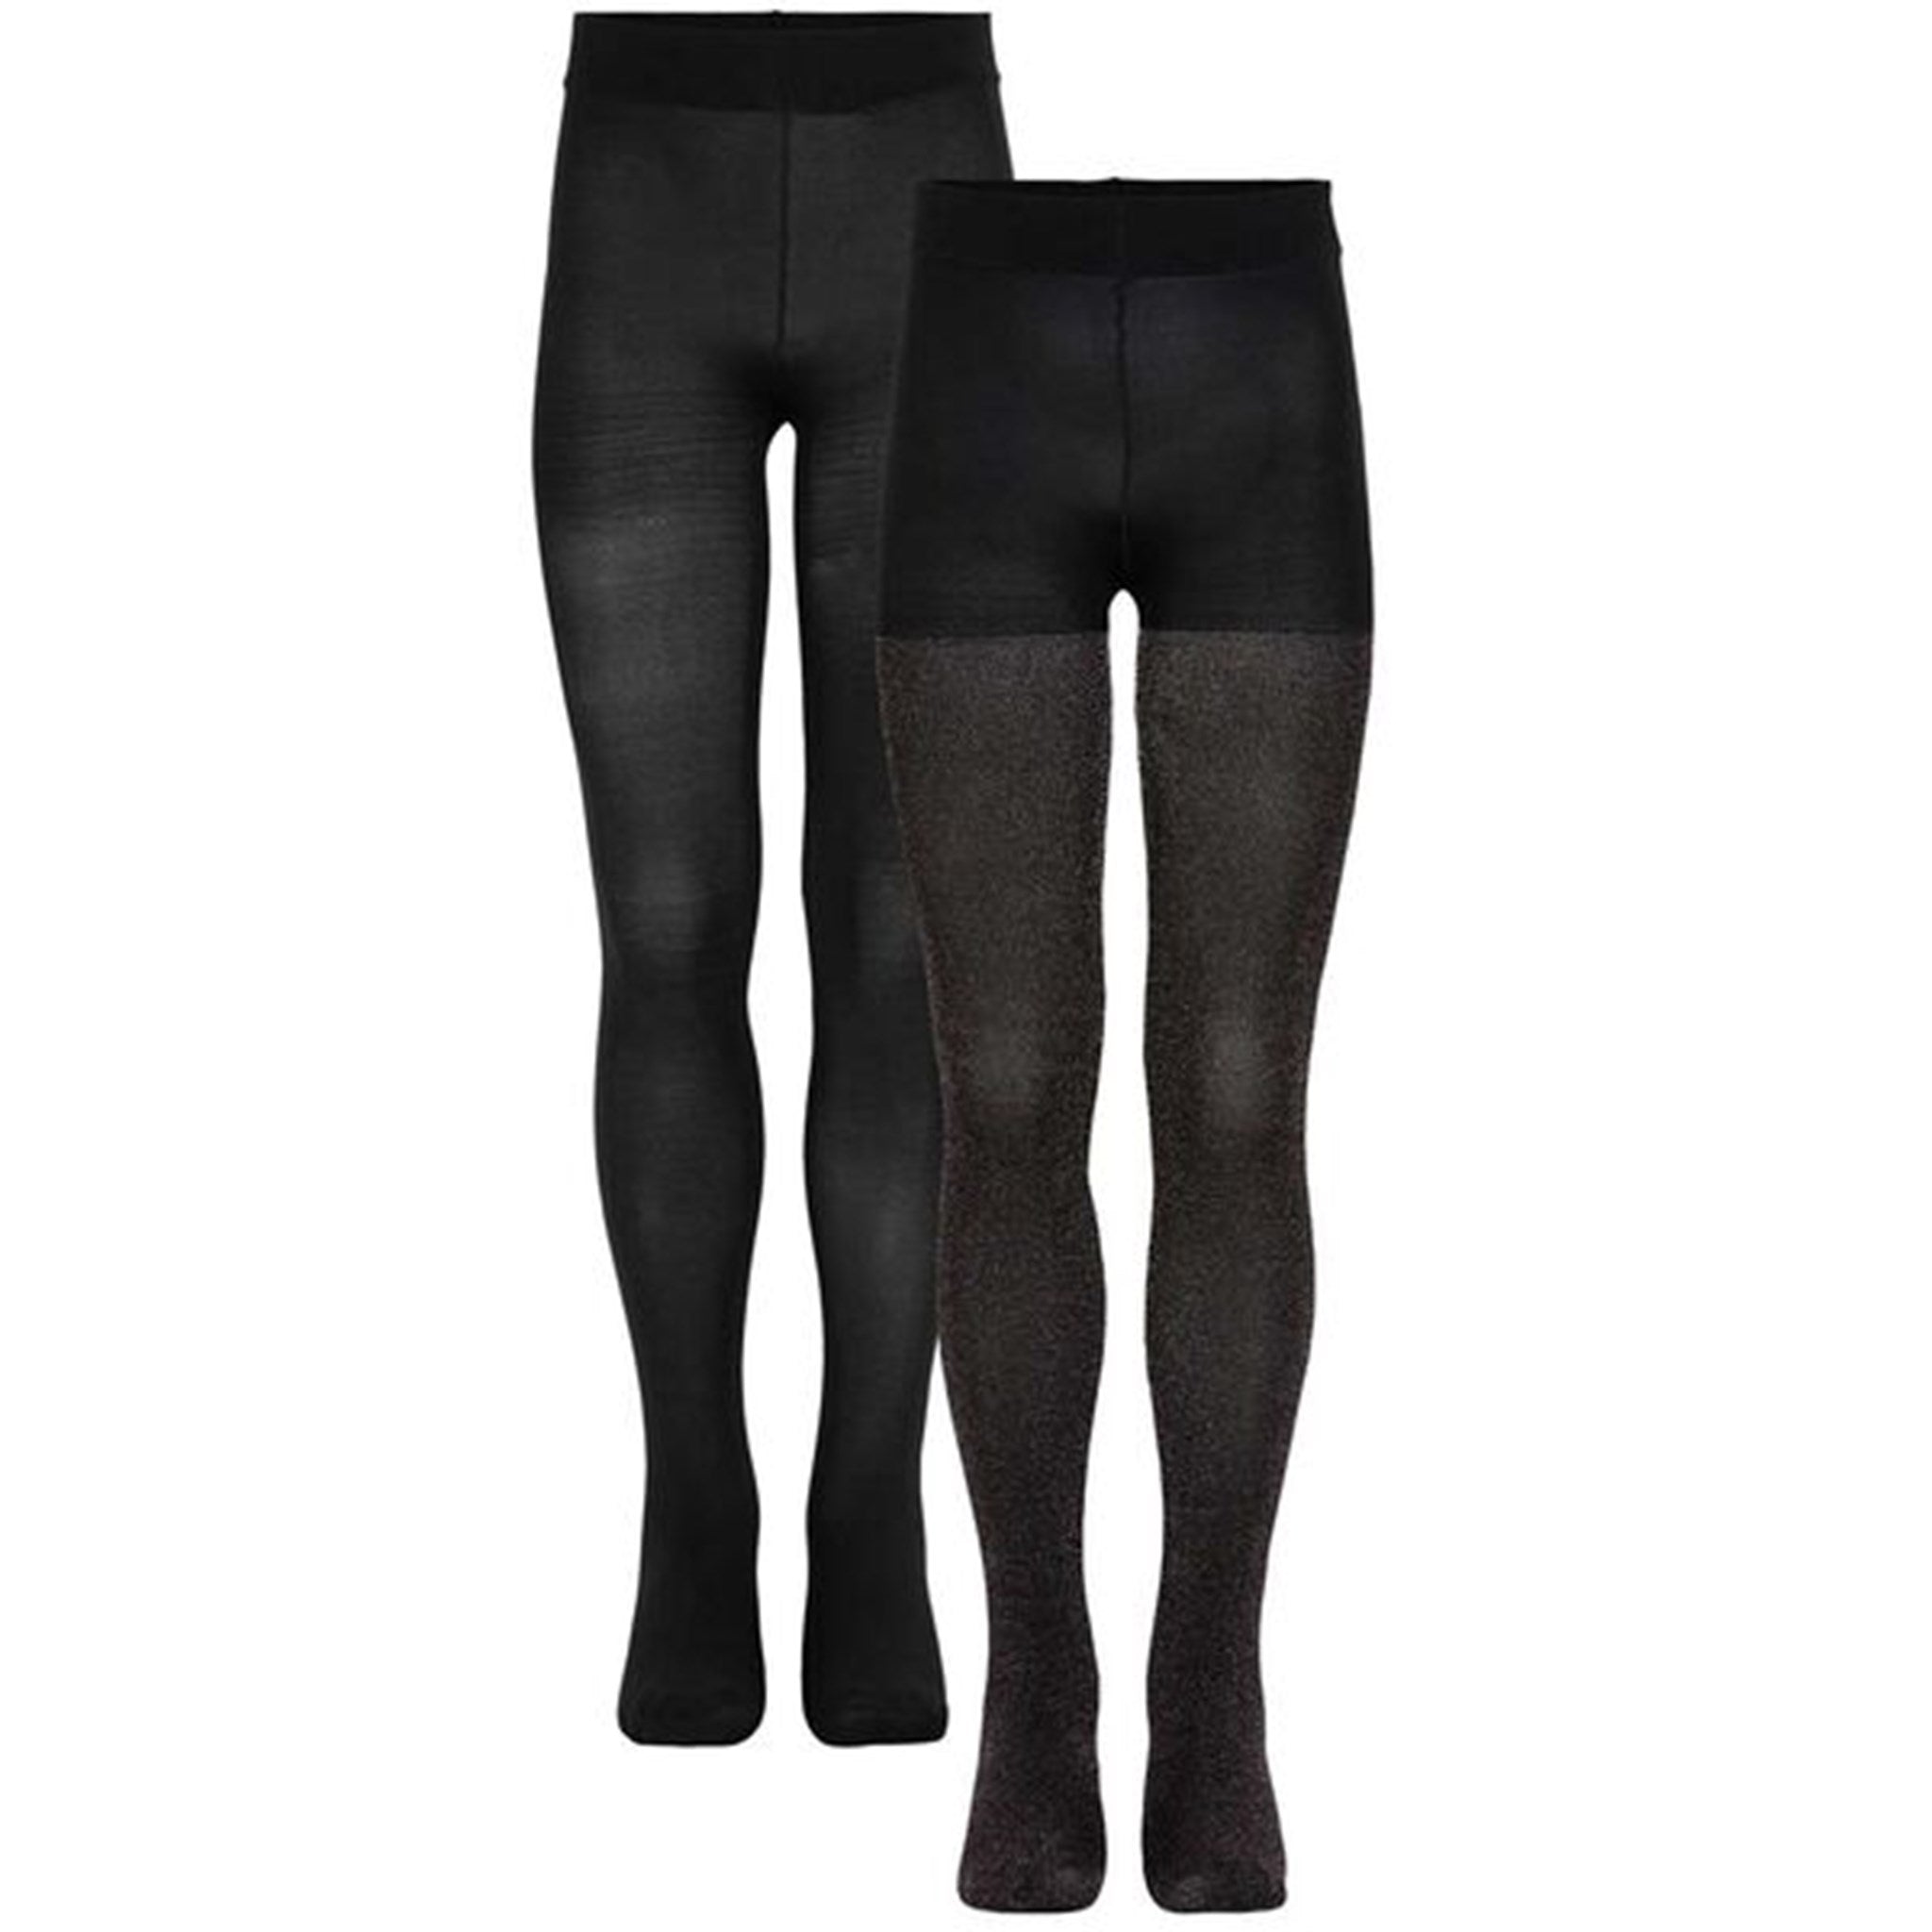 The New 2-pack Tights Black Glitter / Solid